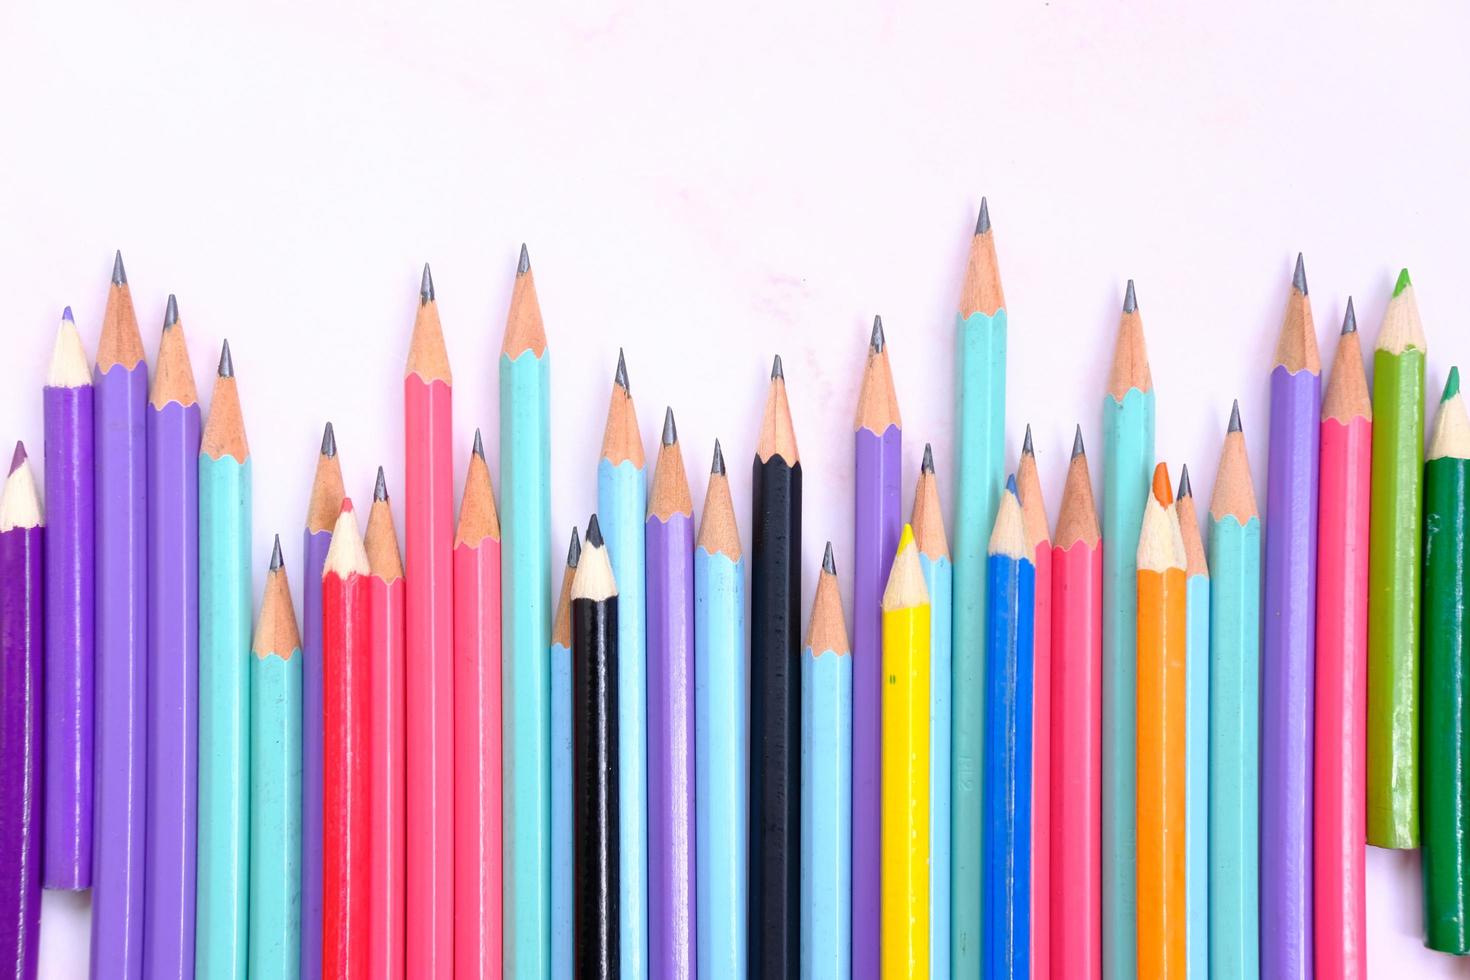 Pen and pencil, office equipment on table background photo